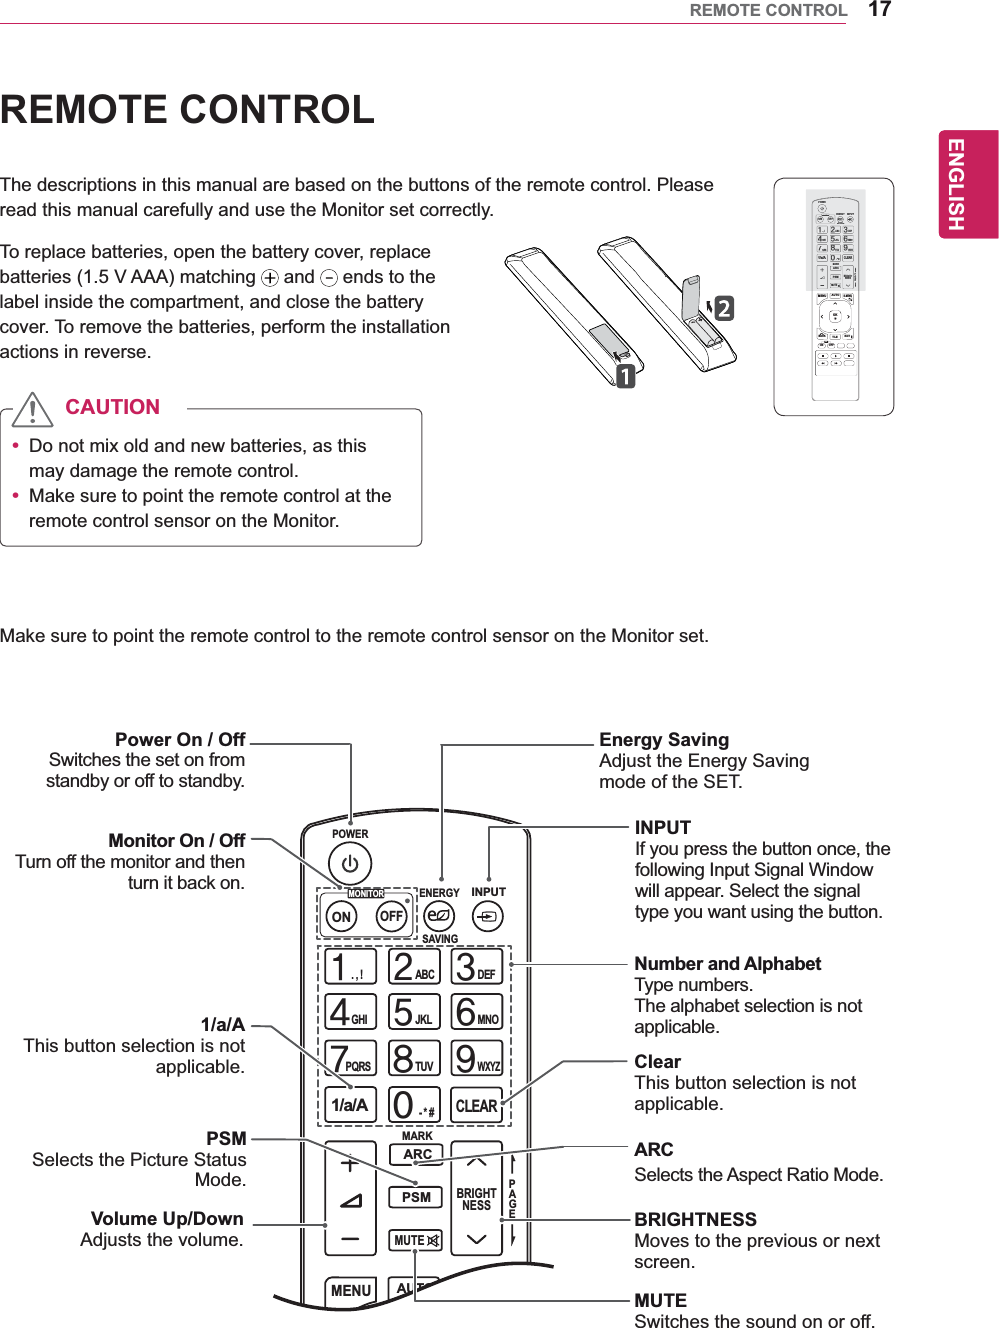 17ENGENGLISHREMOTE CONTROLREMOTE CONTROLThe descriptions in this manual are based on the buttons of the remote control. Please read this manual carefully and use the Monitor set correctly.To replace batteries, open the battery cover, replace batteries (1.5 V AAA) matching   and   ends to the label inside the compartment, and close the battery cover. To remove the batteries, perform the installation actions in reverse.Make sure to point the remote control to the remote control sensor on the Monitor set.CAUTIONy Do not mix old and new batteries, as this may damage the remote control.y Make sure to point the remote control at the remote control sensor on the Monitor.PAGEINPUTENERGYSAVINGMARKARCONOFF. , !ABCDEFGHIJKLMNOPQRSTUV1/a/A- * #WXYZCLEAROKS.MENUMONITORPSMAUTOMUTEBRIGHTNESSMENUIDBACK TILEON OFFEXITPOWERPAGEINPUTENERGYSAVINGMARKARC. , !ABCDEFGHIJKLMNOPQRSTUV1/a/A- * #WXYZCLEARONOFFMONITORMONITORPSMMUTEBRIGHTNESSPOWERPAGEINPUTENERGYSAVINGMARKARCONOFF. , !ABCDEFGHIJKLMNOPQRSTUV1/a/A- * #WXYZCLEARS.MENUMONITORPSMAUTOMUTEBRIGHTNESSMENUPOWER Power On / Off Switches the set on from standby or off to standby.Monitor On / OffTurn off the monitor and then turn it back on.1/a/A This button selection is not applicable.Energy SavingAdjust the Energy Saving mode of the SET.INPUTIf you press the button once, the following Input Signal Window will appear. Select the signal type you want using the button.Number and AlphabetType numbers.The alphabet selection is not applicable. ClearThis button selection is not applicable.PSMSelects the Picture Status Mode.Volume Up/DownAdjusts the volume.ARCSelects the Aspect Ratio Mode.BRIGHTNESSMoves to the previous or next screen.MUTESwitches the sound on or off.